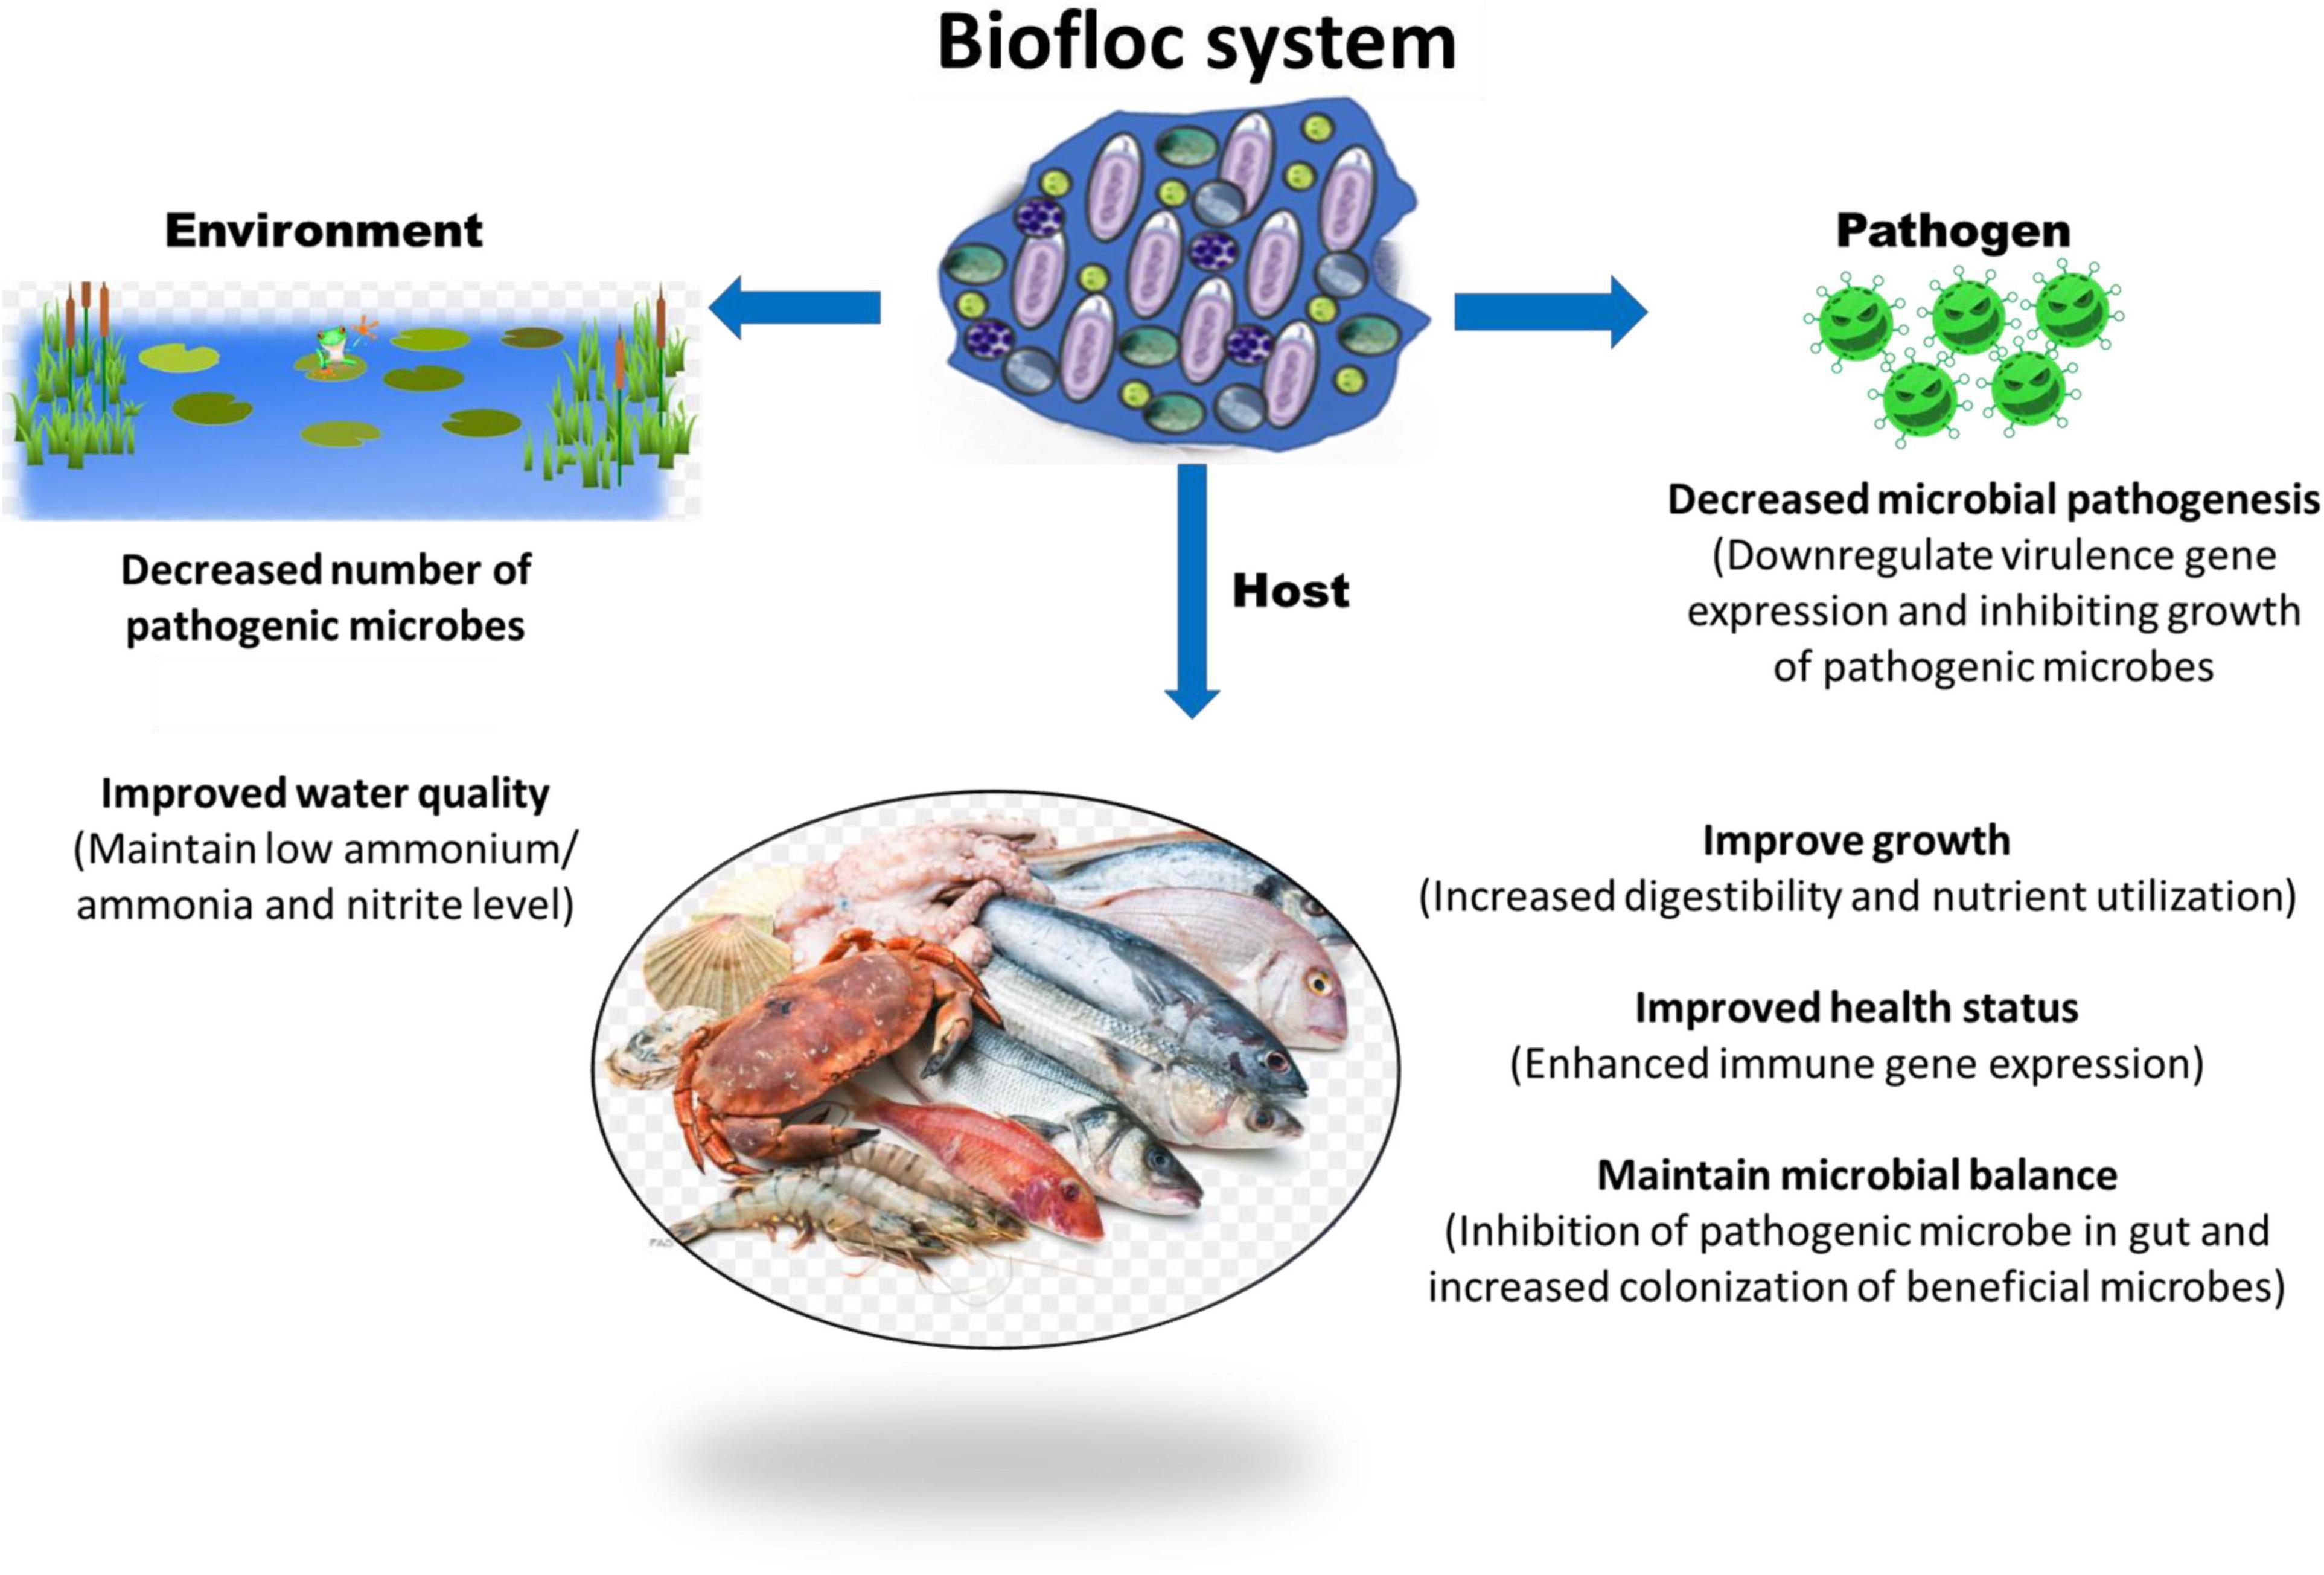 Frontiers | Biofloc Microbiome With Bioremediation and Health Benefits